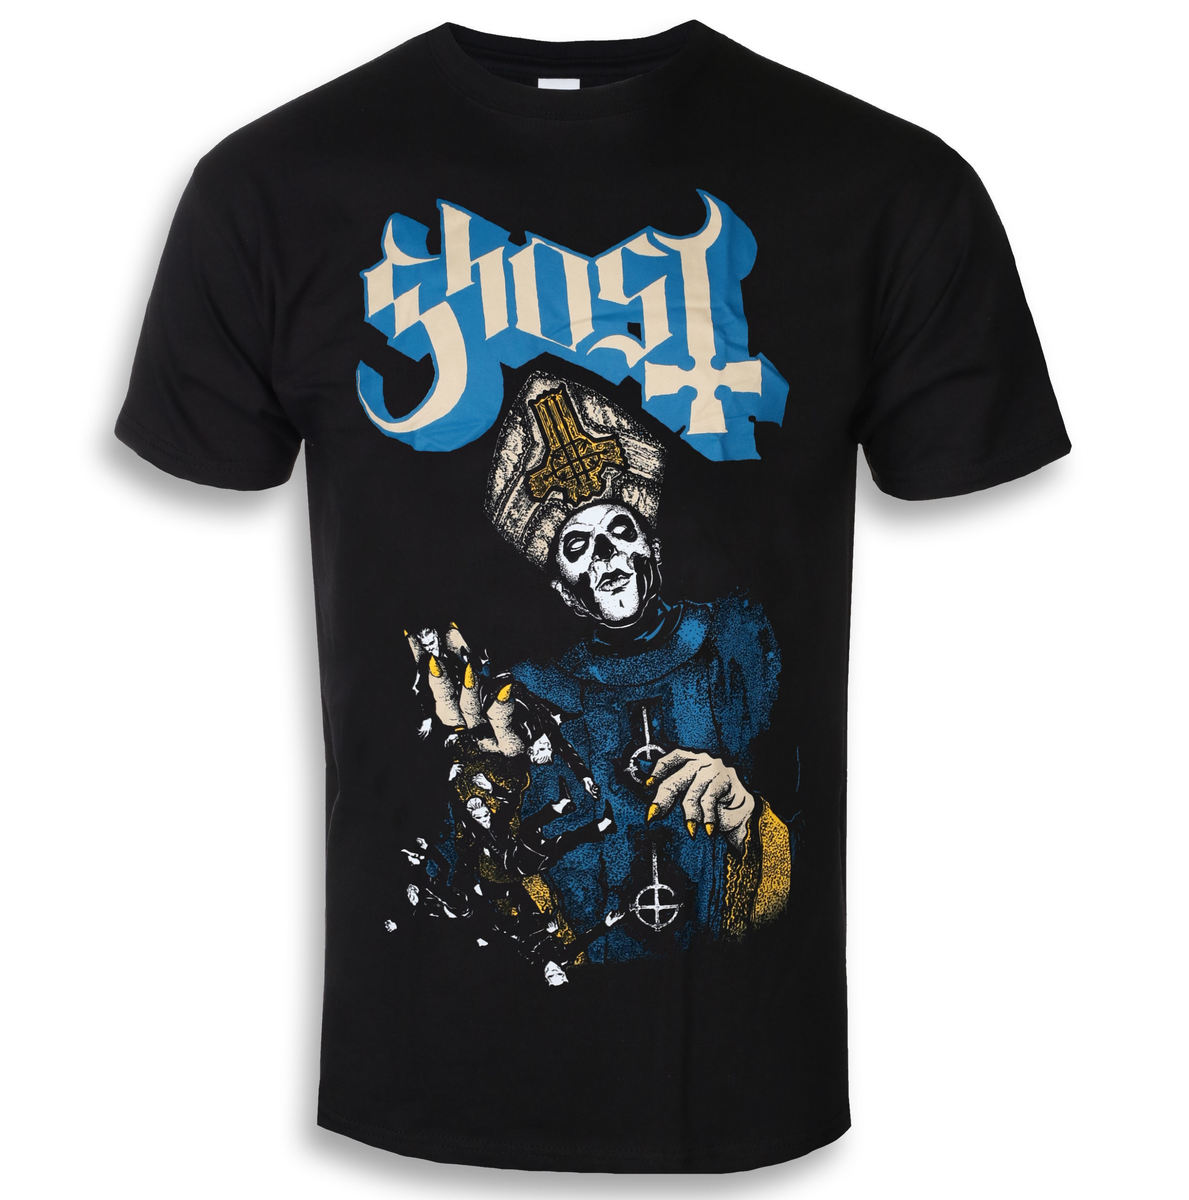 Ghost - Papa Of The World (XL)